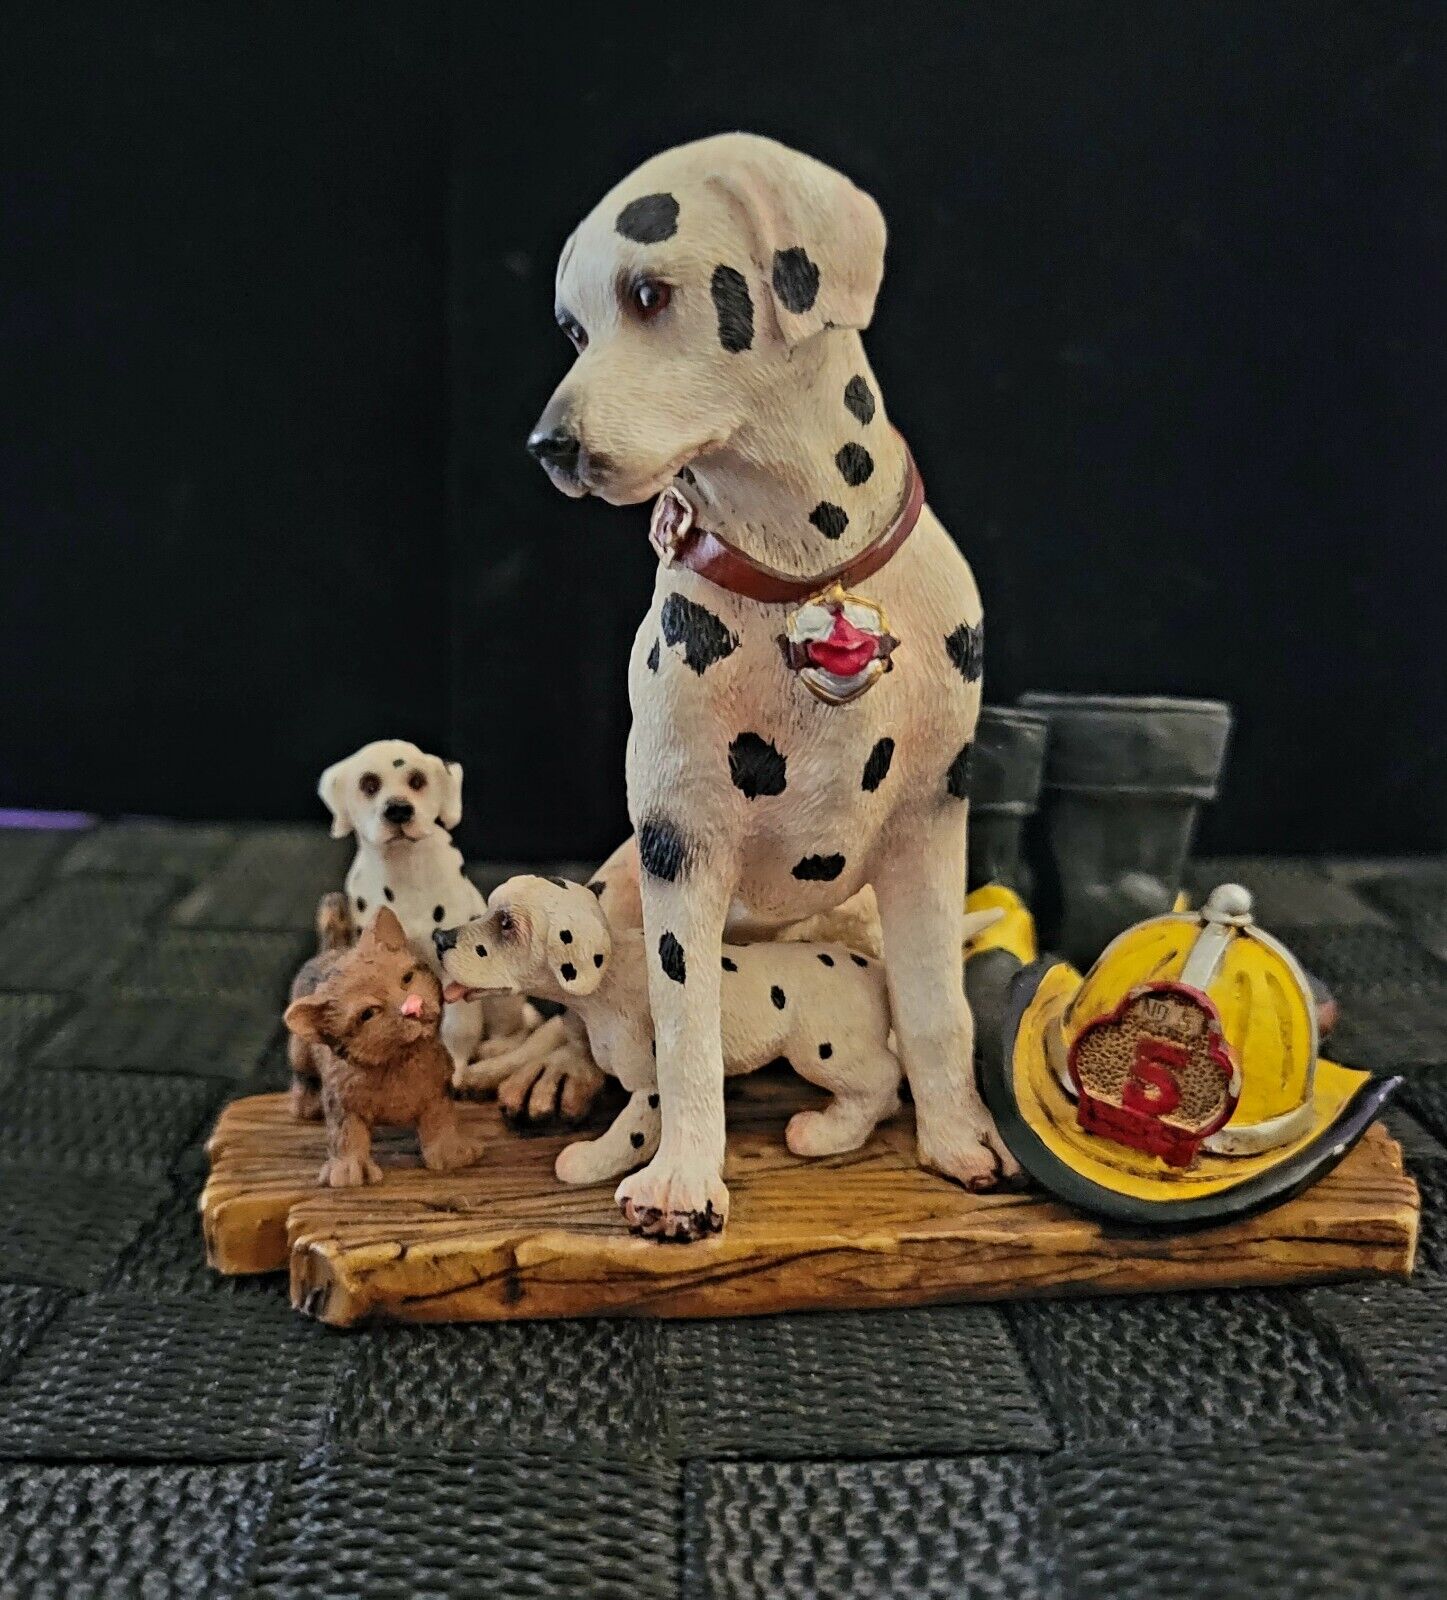 Dalmation Fire Dog With Puppues And Firemans Boots /hat